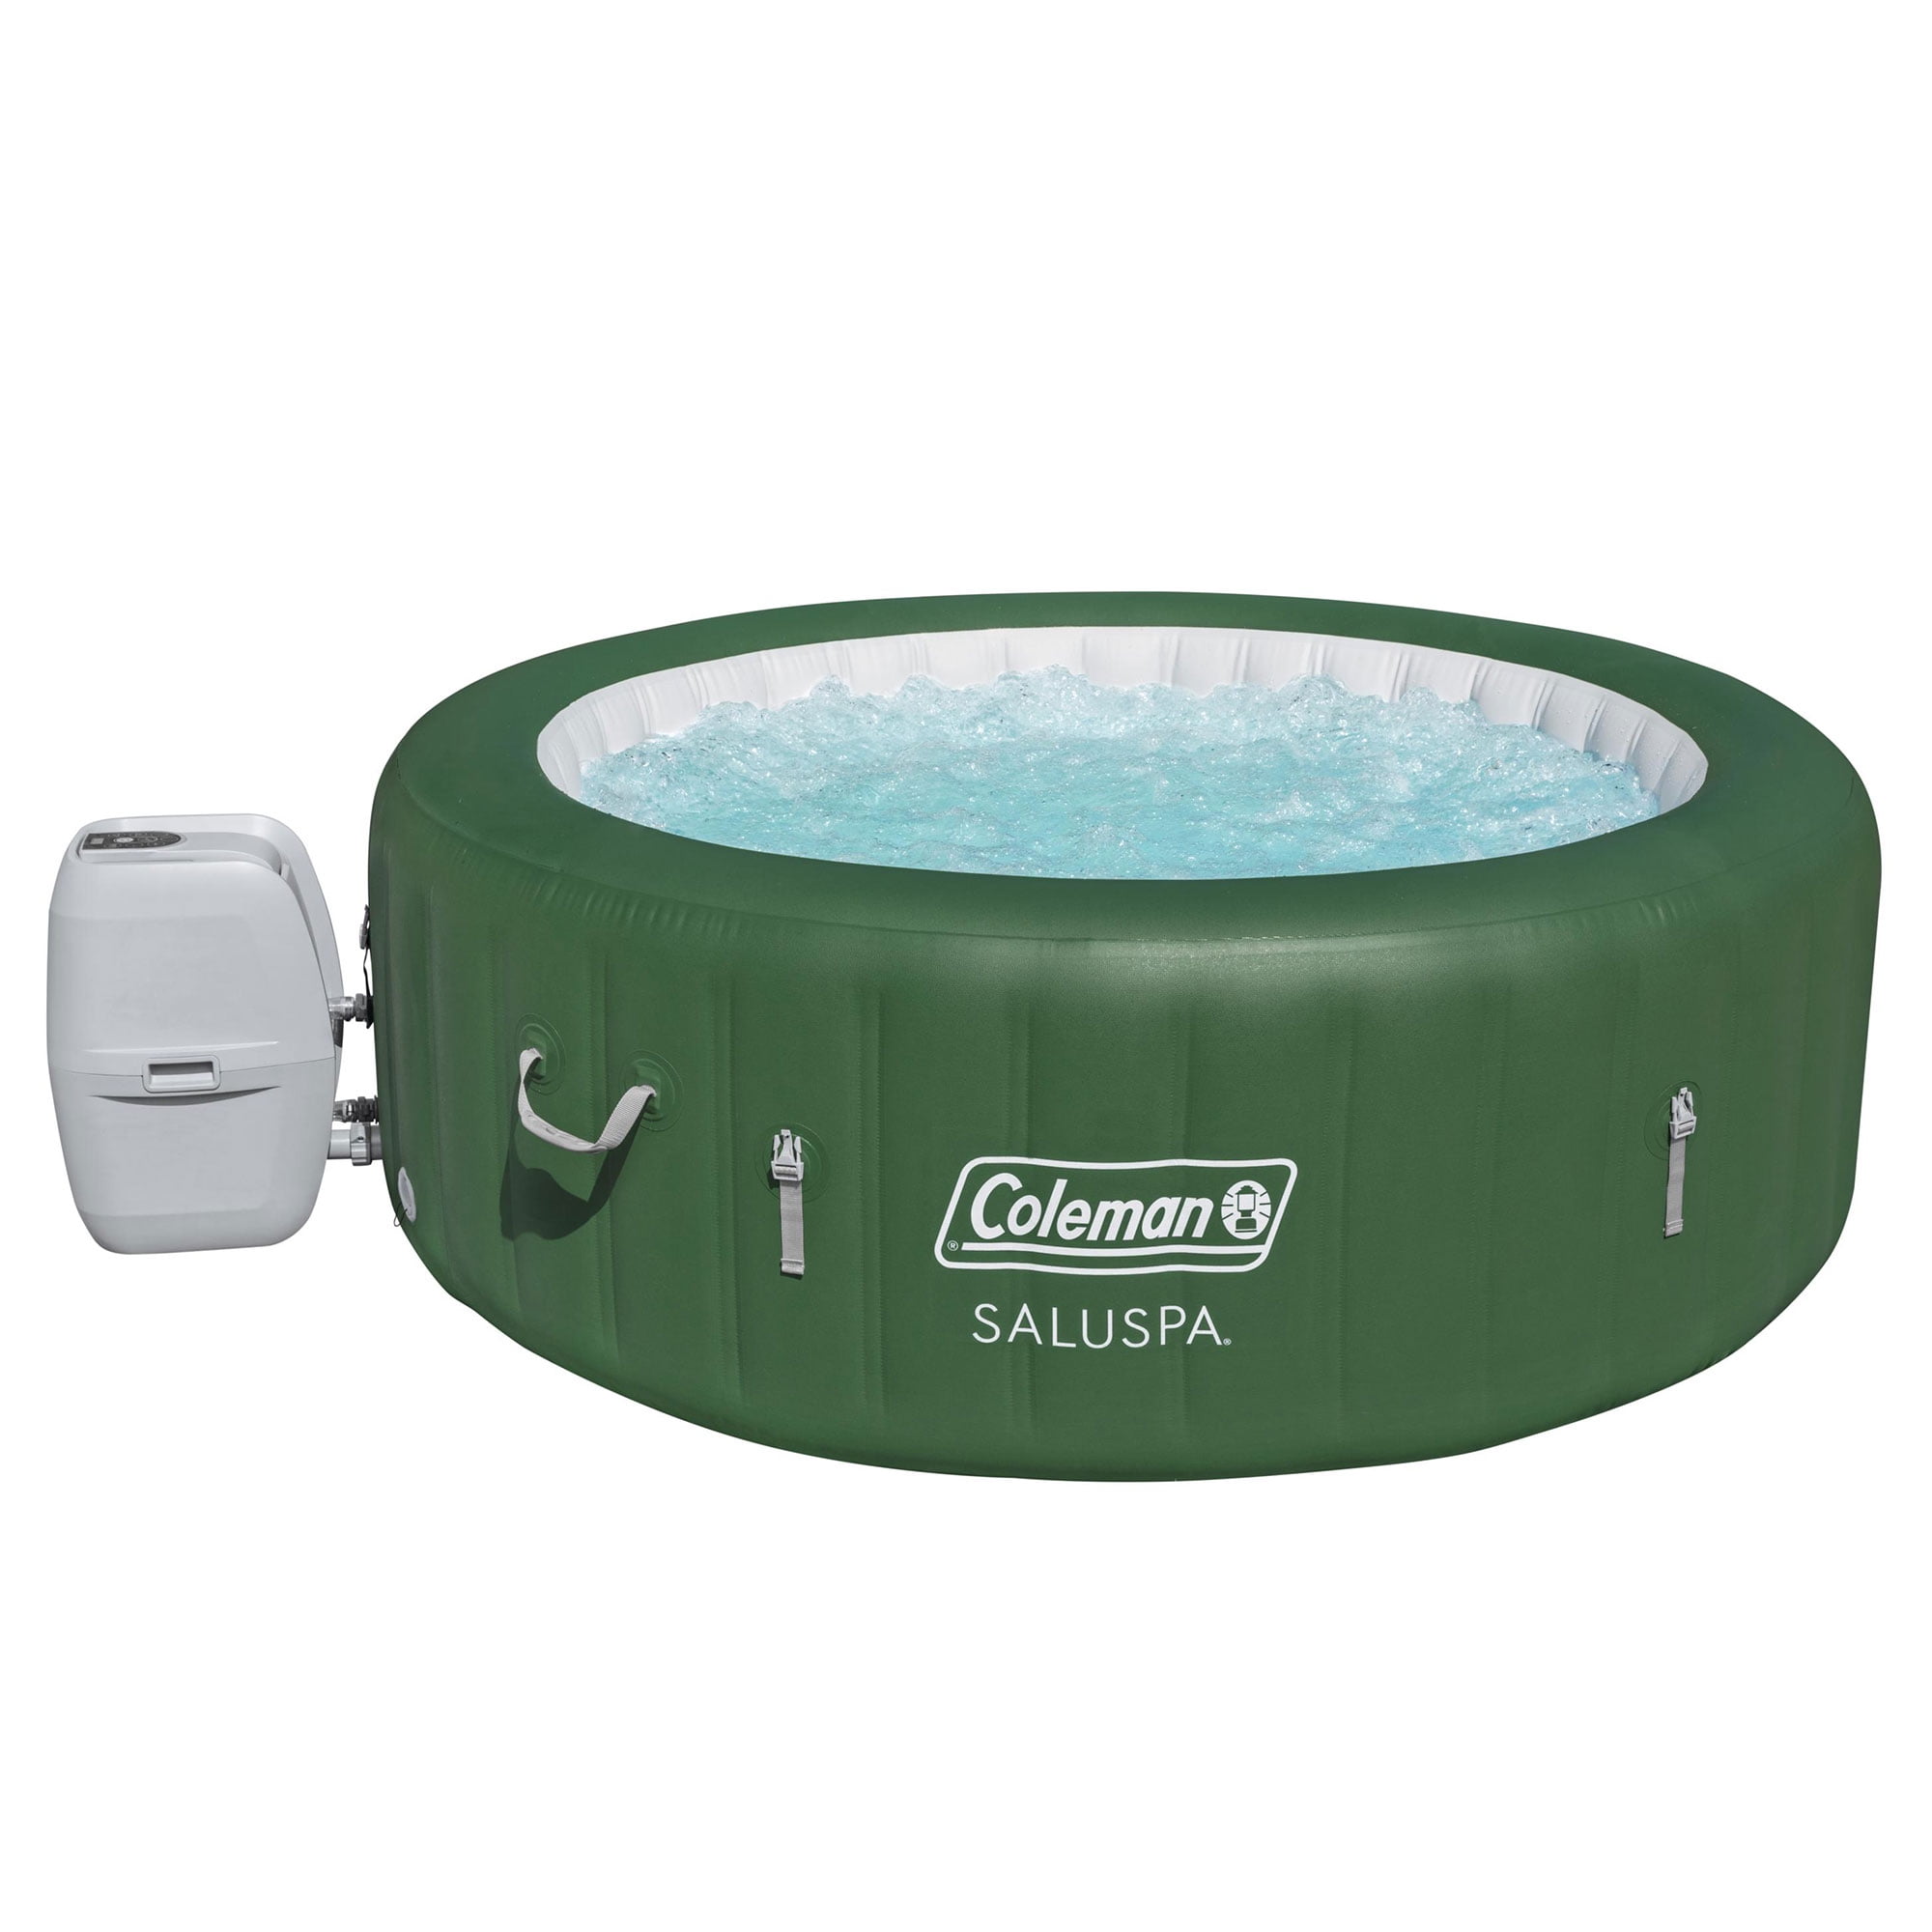 Coleman SaluSpa 6 Round Portable Inflatable Outdoor Hot Tub Spa with 140 Jets, Cover, and Green - Walmart.com